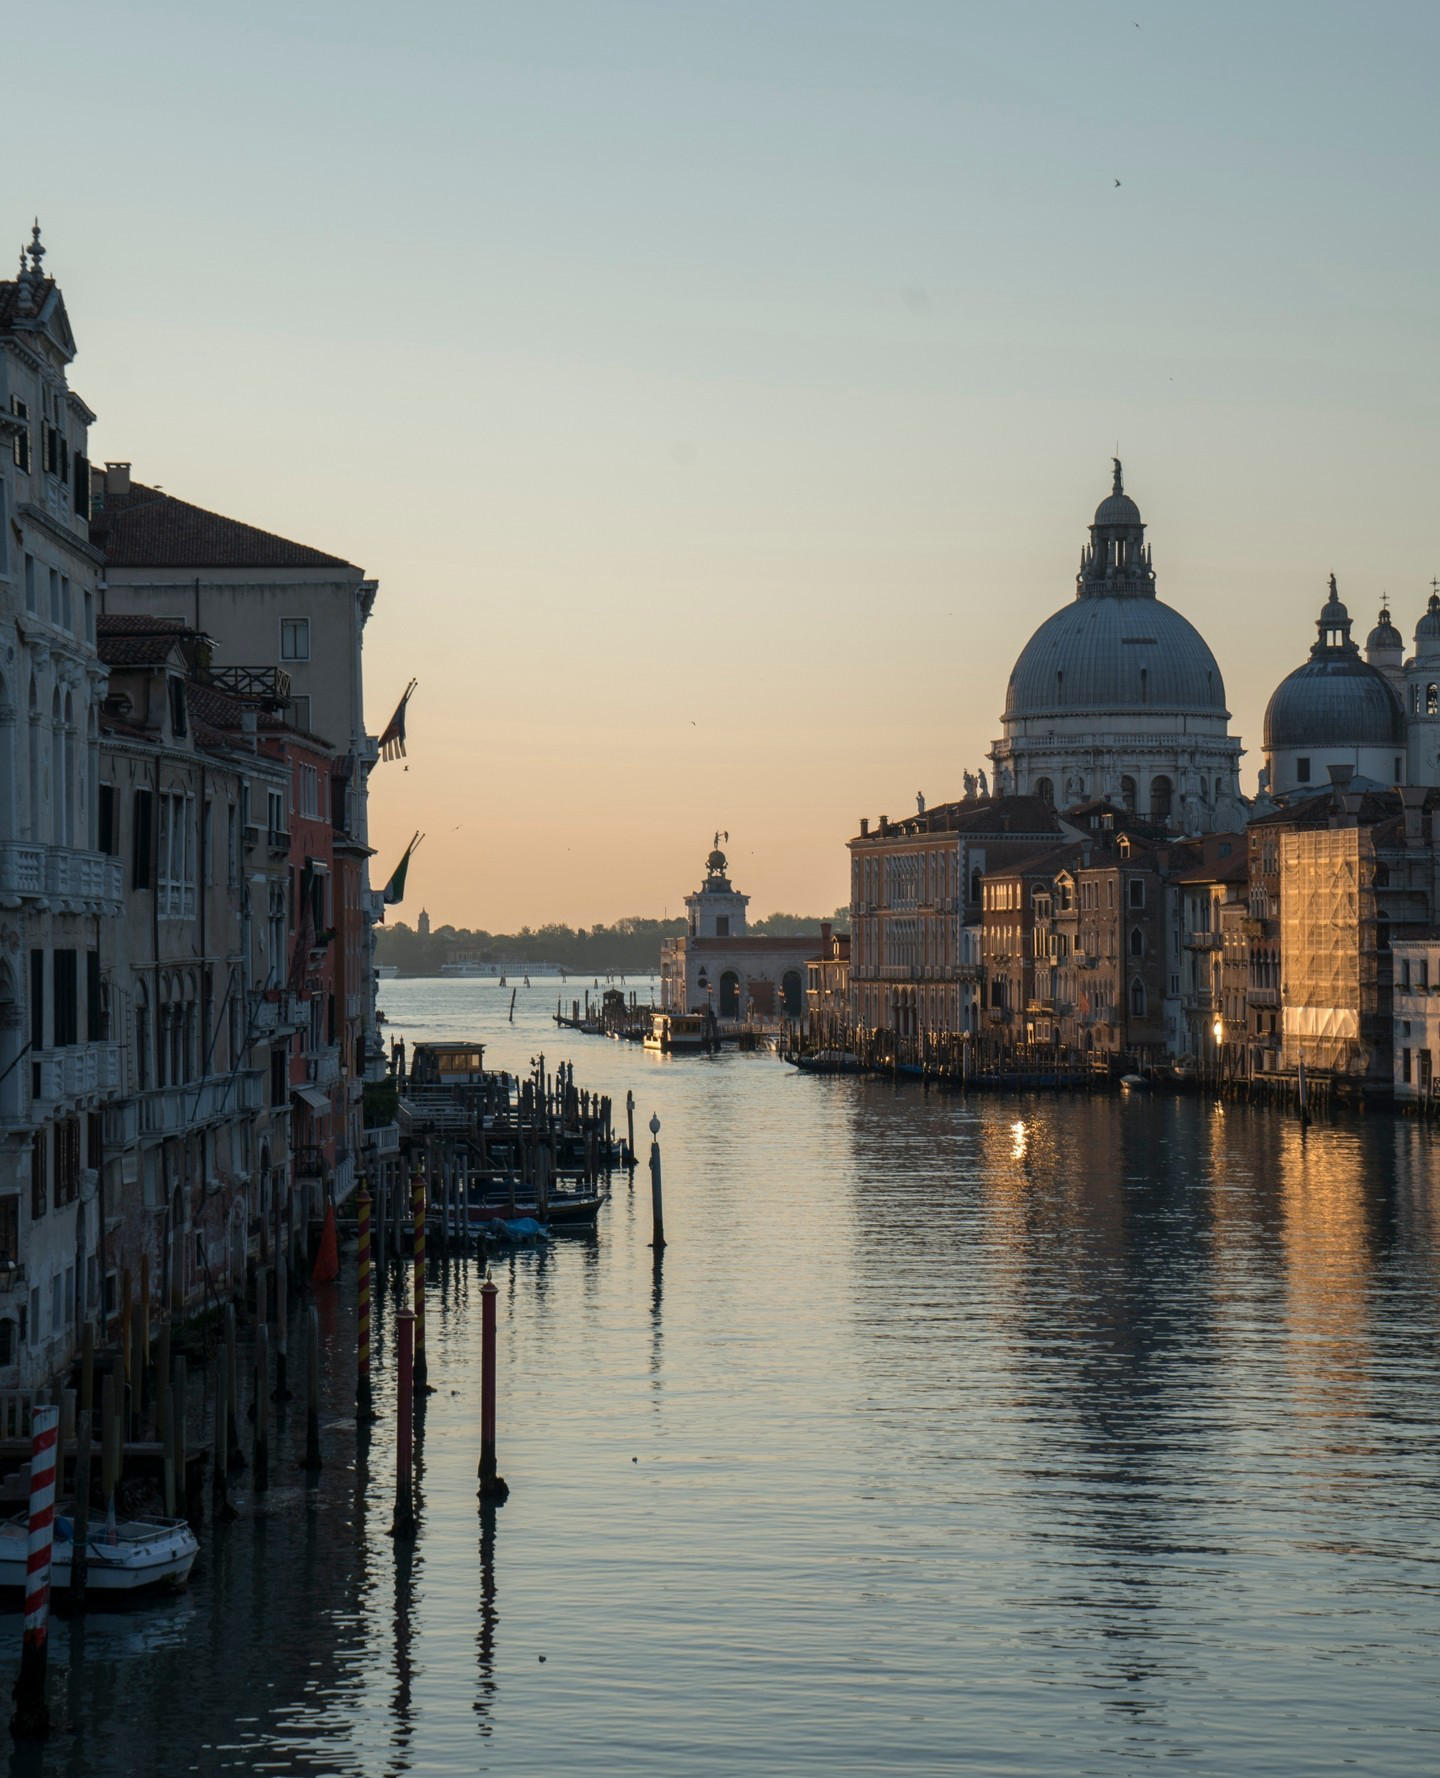 Aman Venice - ‘If anything can rival Venice in its beauty, it must be its reflection at sunset in th